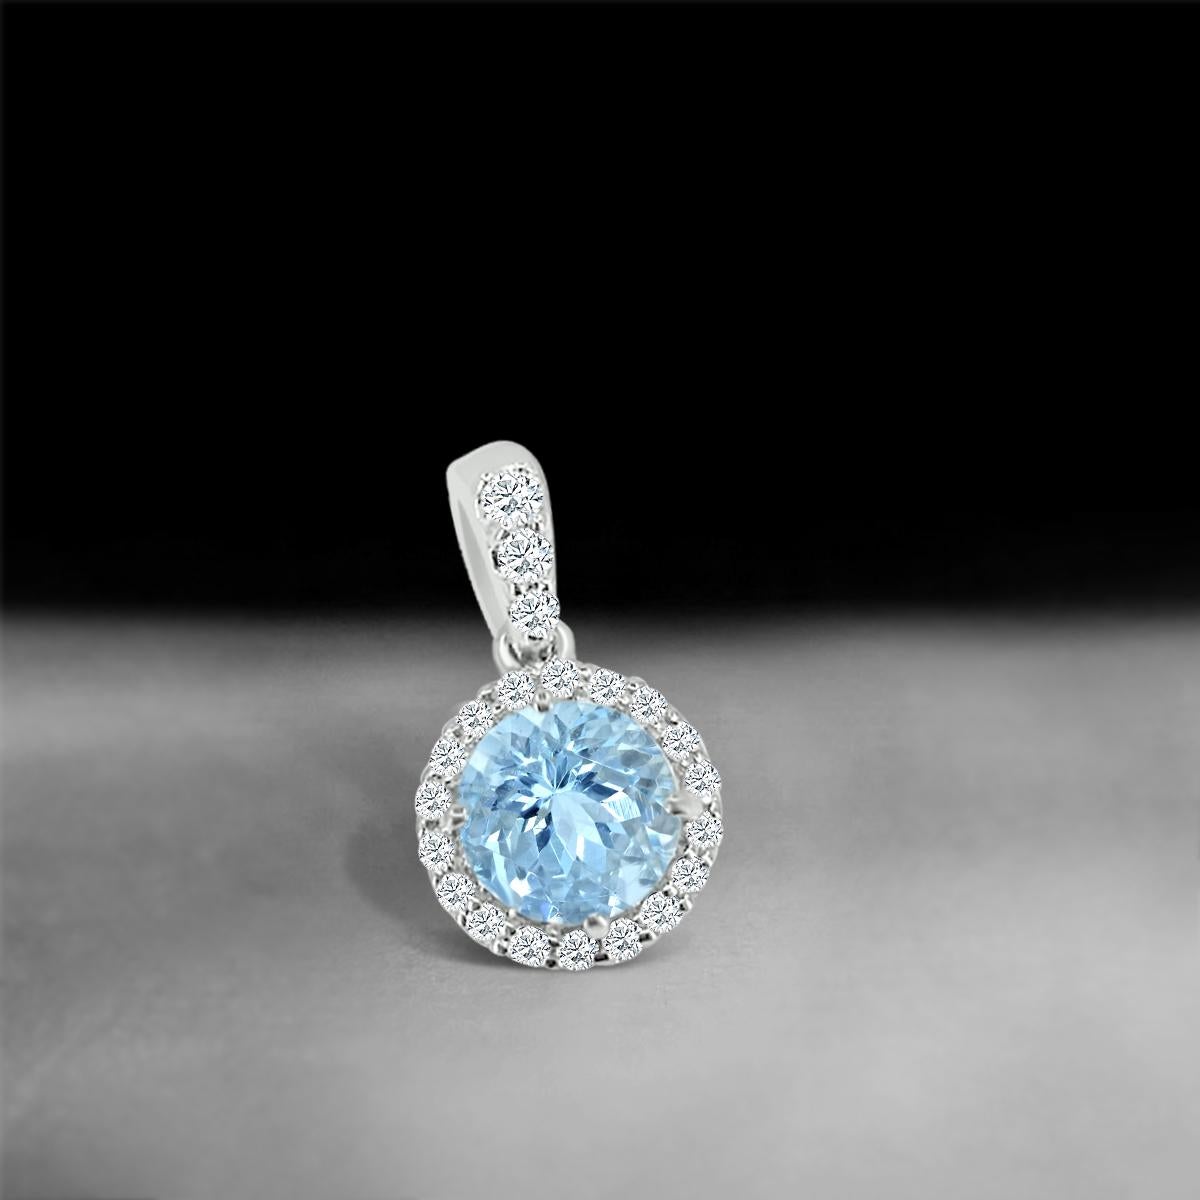 It's Classic Elegance And Timeless Styling Makes This Pendant, The Perfect Gift To Yourself Or To Someone You Love. A 6mm Round Aquamarine Casts A Shimmer With The Border Of Diamonds Around It.
This Beautiful Gemstone Pendant Is Crafted In 14k White